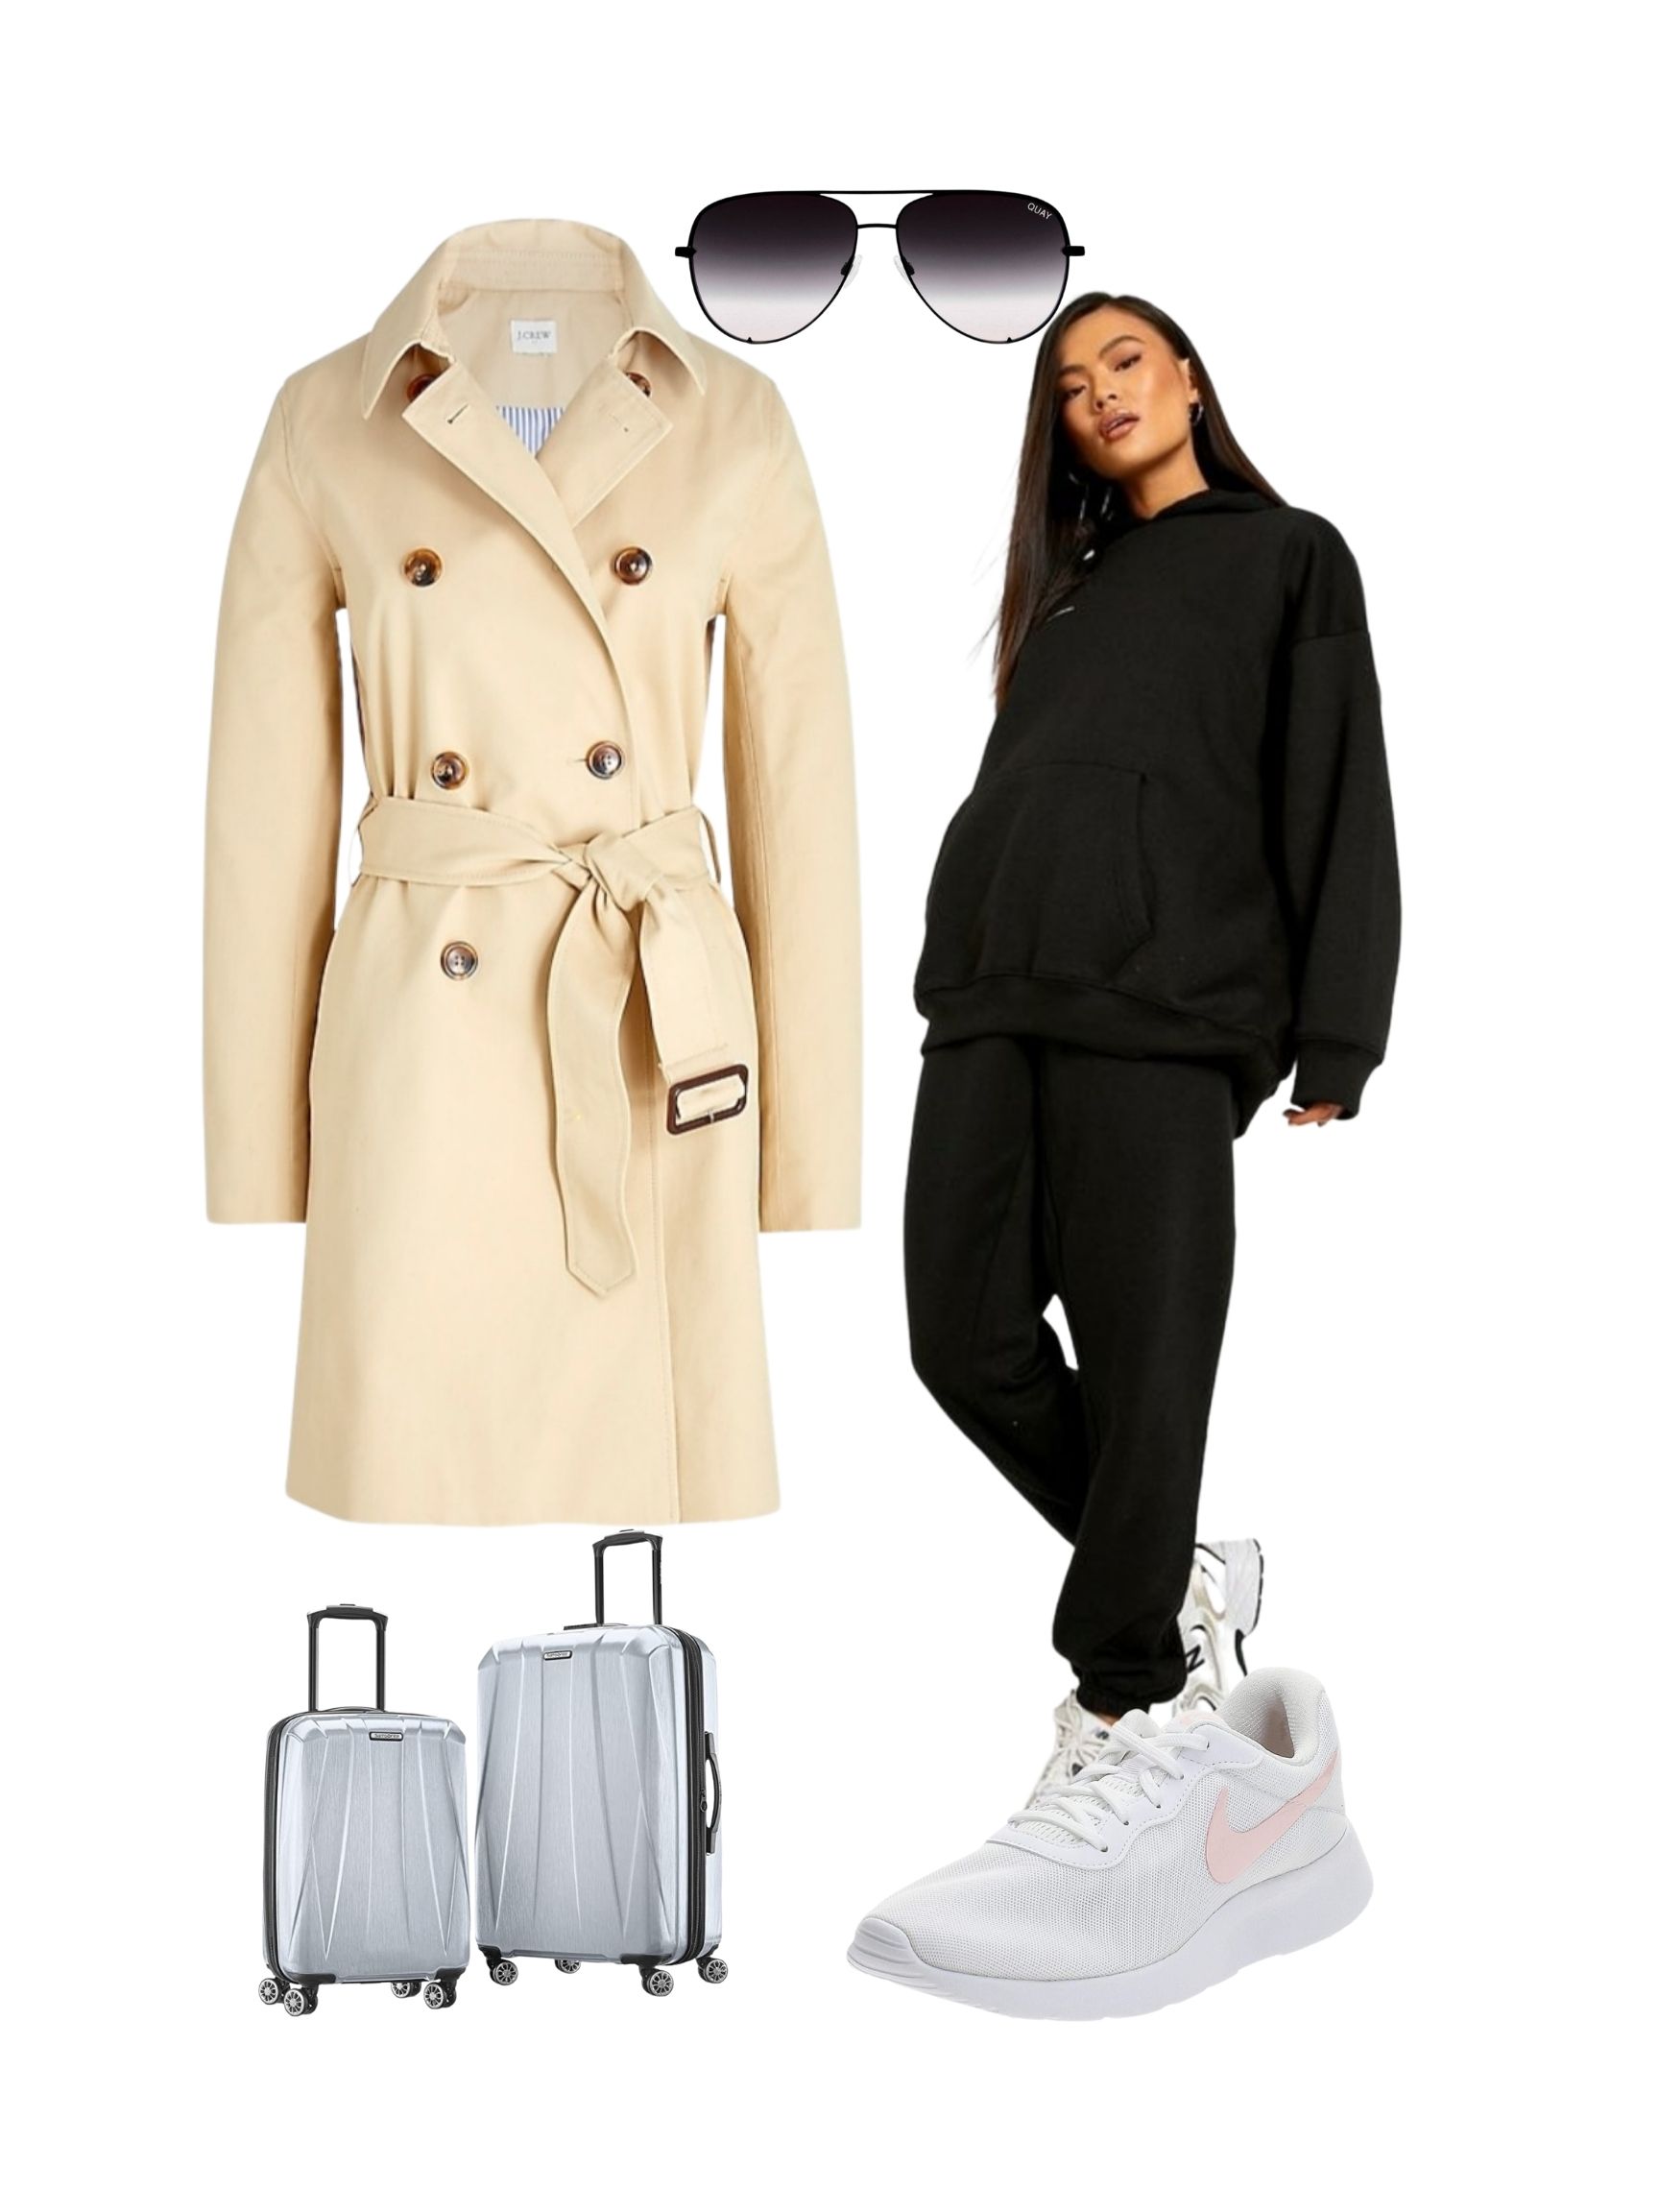 Trench Coat Outfit with sweatshirt and sweatpants